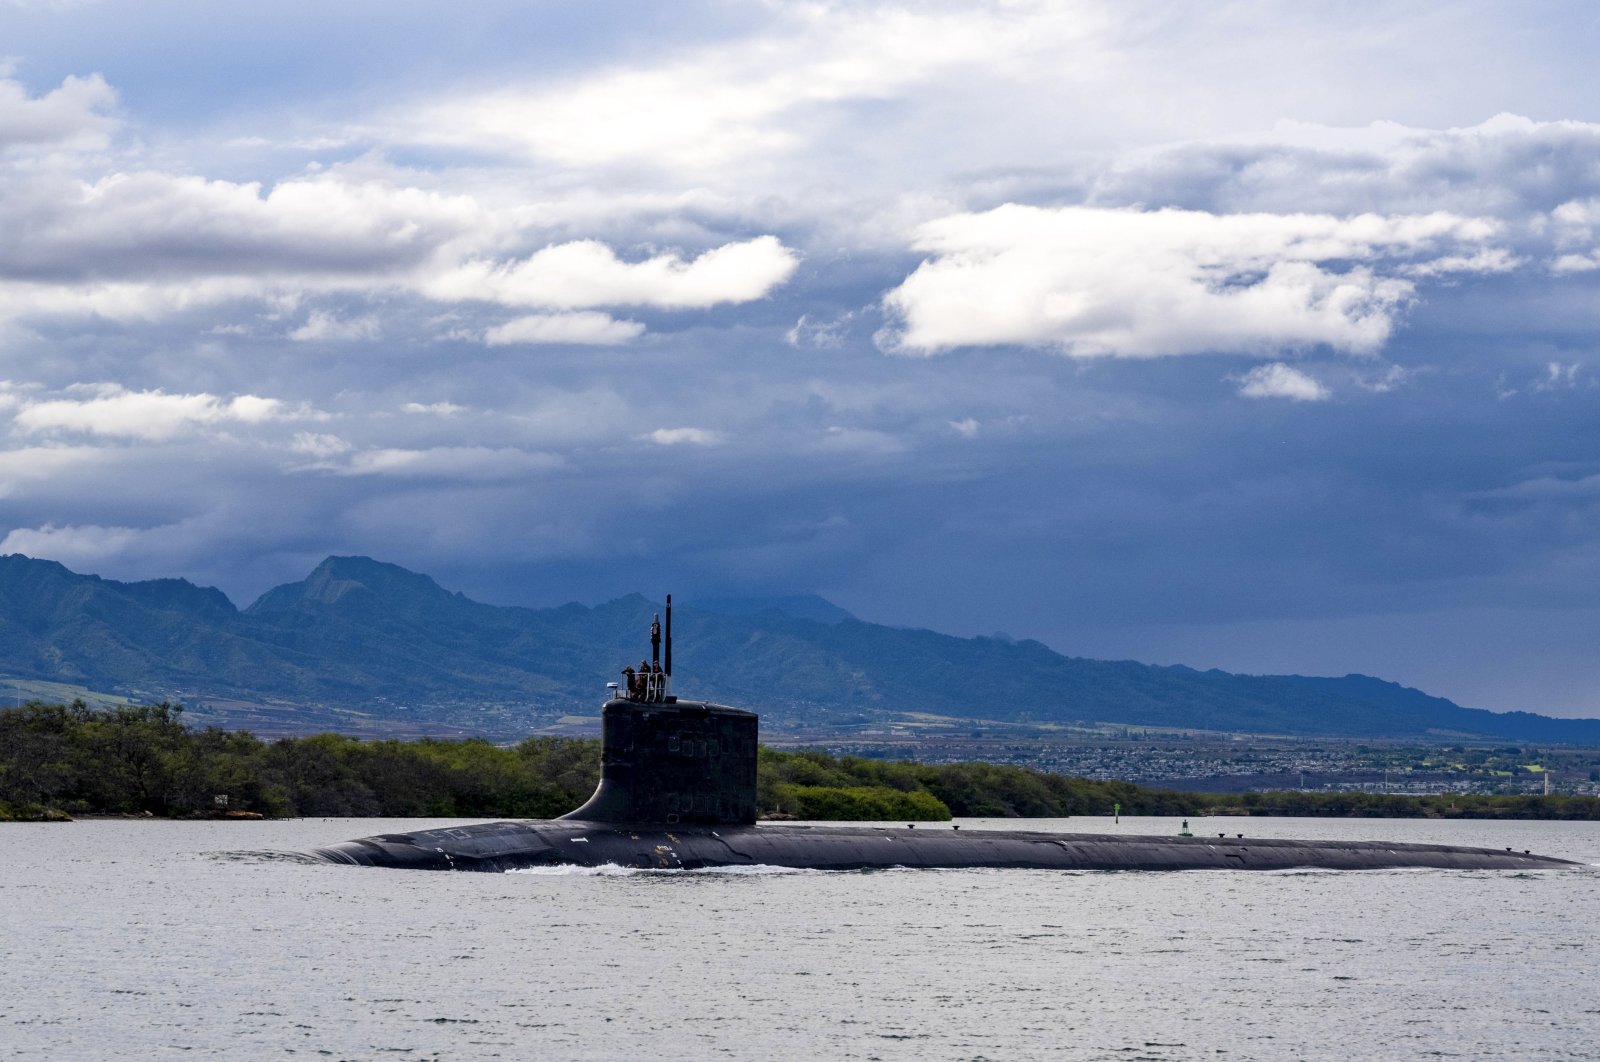 The Virginia-class fast-attack submarine USS Missouri (SSN 780) departs Joint Base Pearl Harbor-Hickam for a scheduled deployment in the 7th Fleet area of responsibility, Sept. 1, 2021. (U.S. Navy via AP)